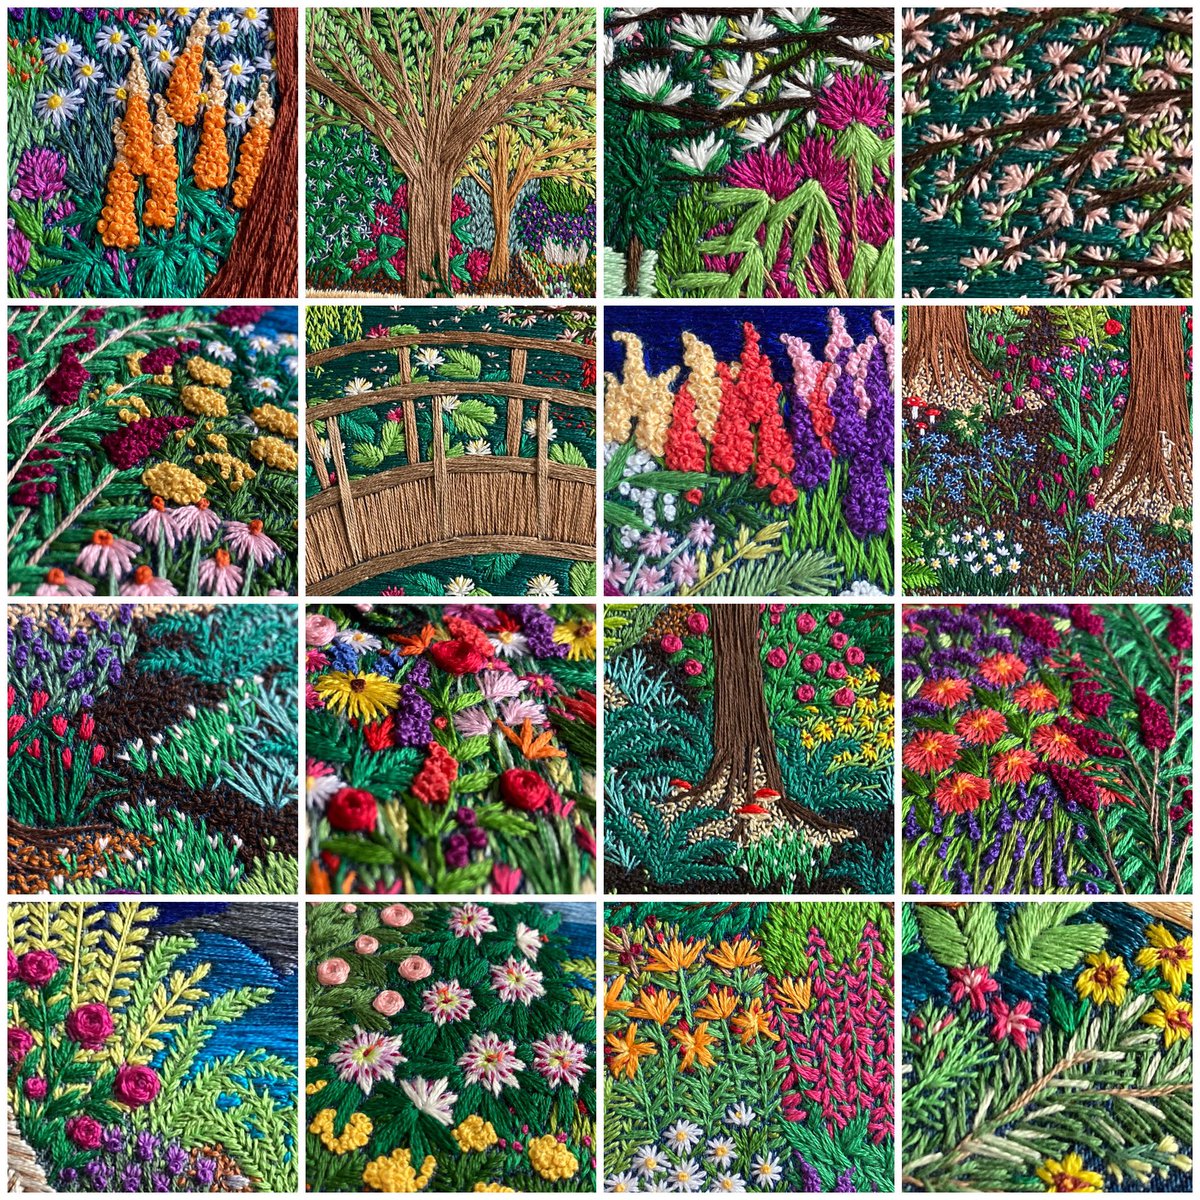 'A collage full of nature 🌱🌷' from Gemma Matthews, contemporary embroidery artist who creates free hand pieces #WomensArt